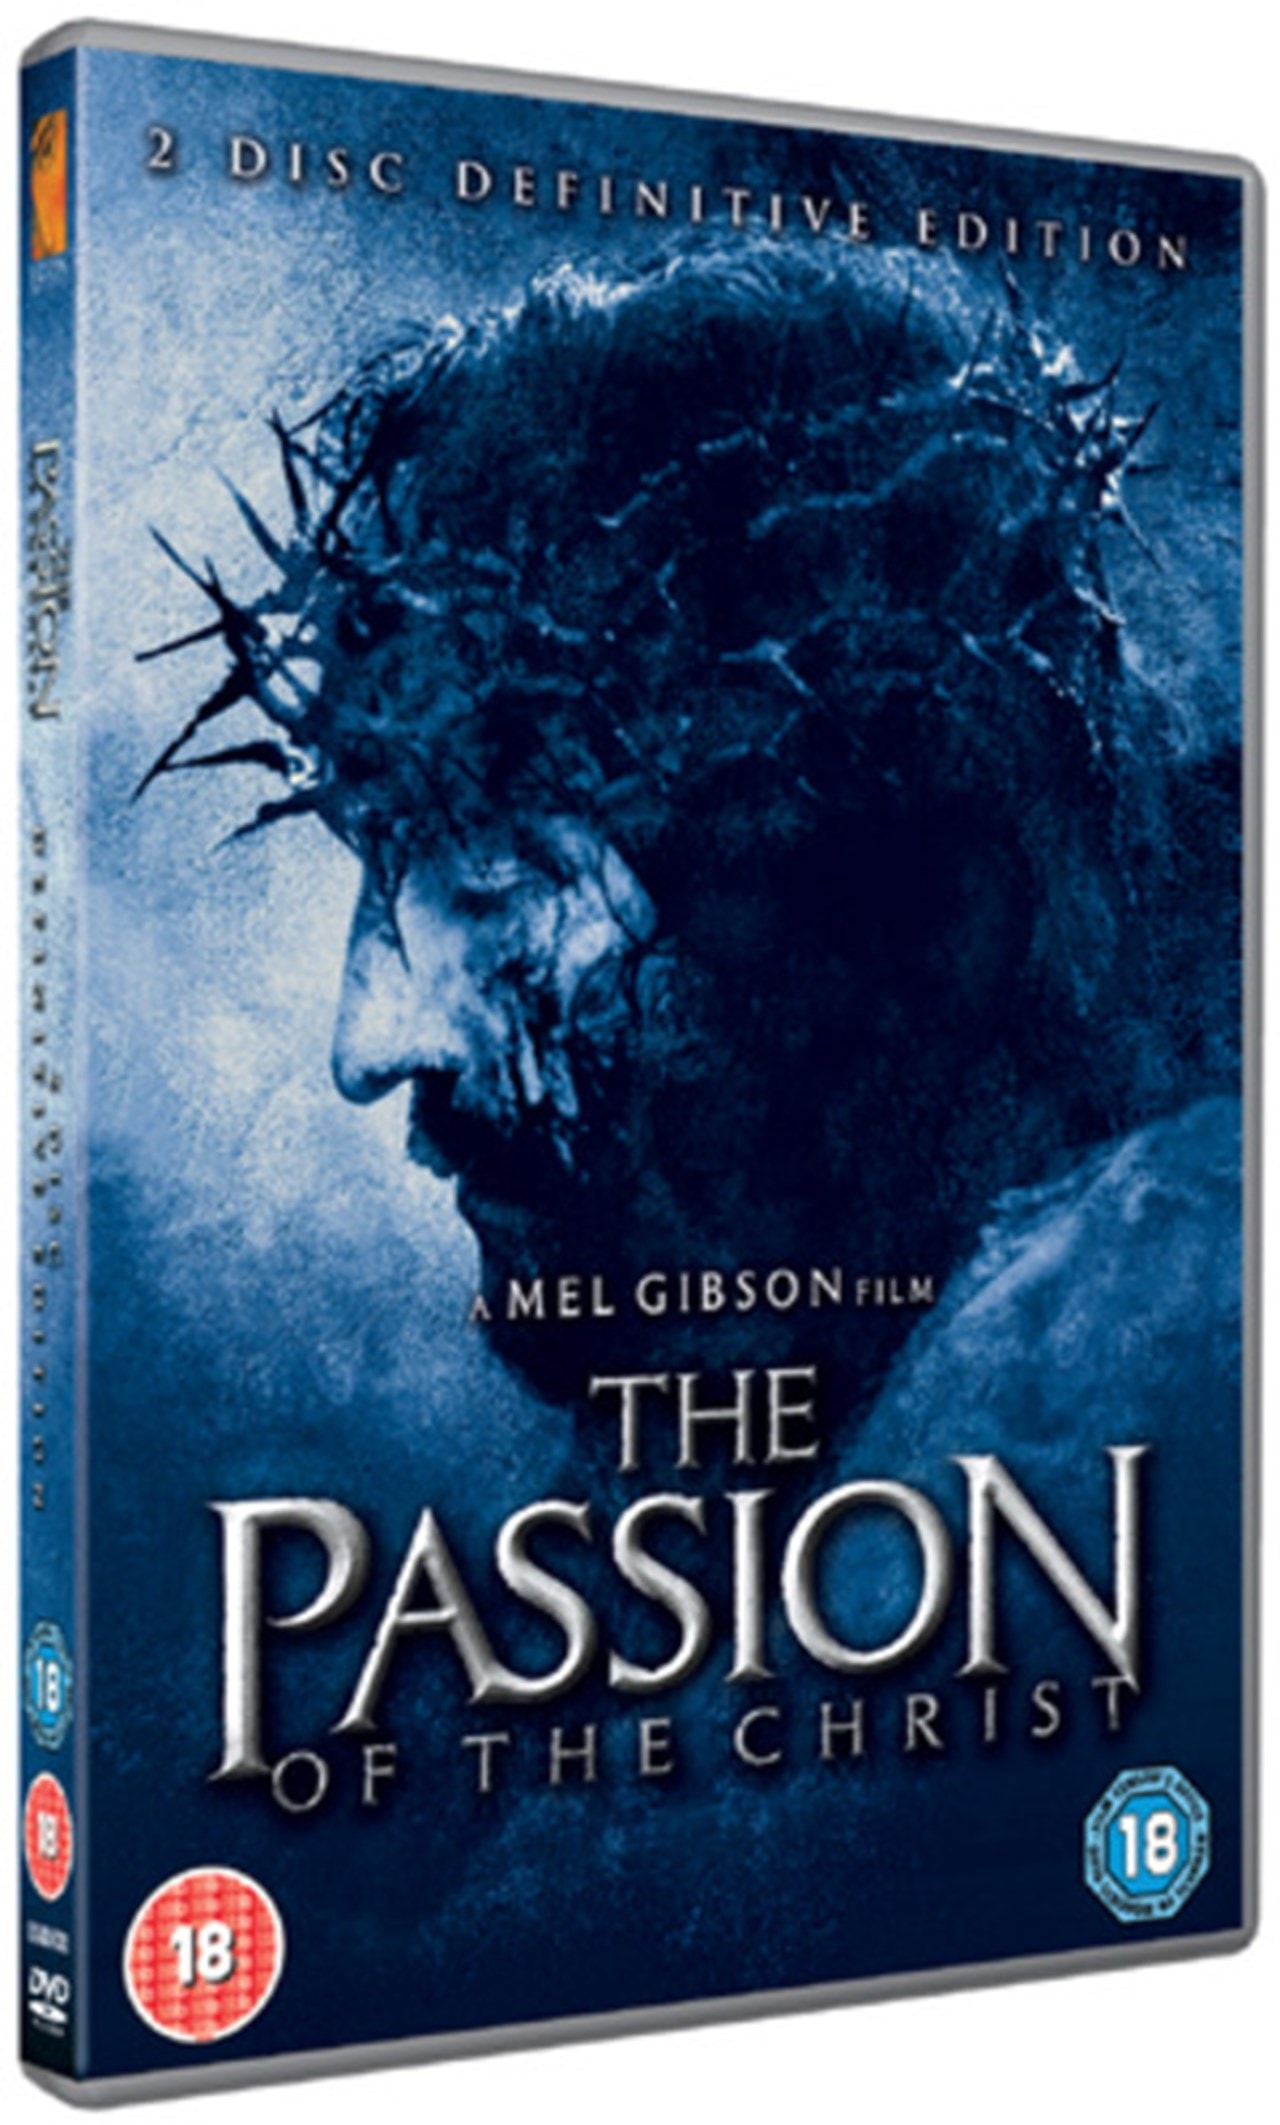 how to watch passion of the christ online